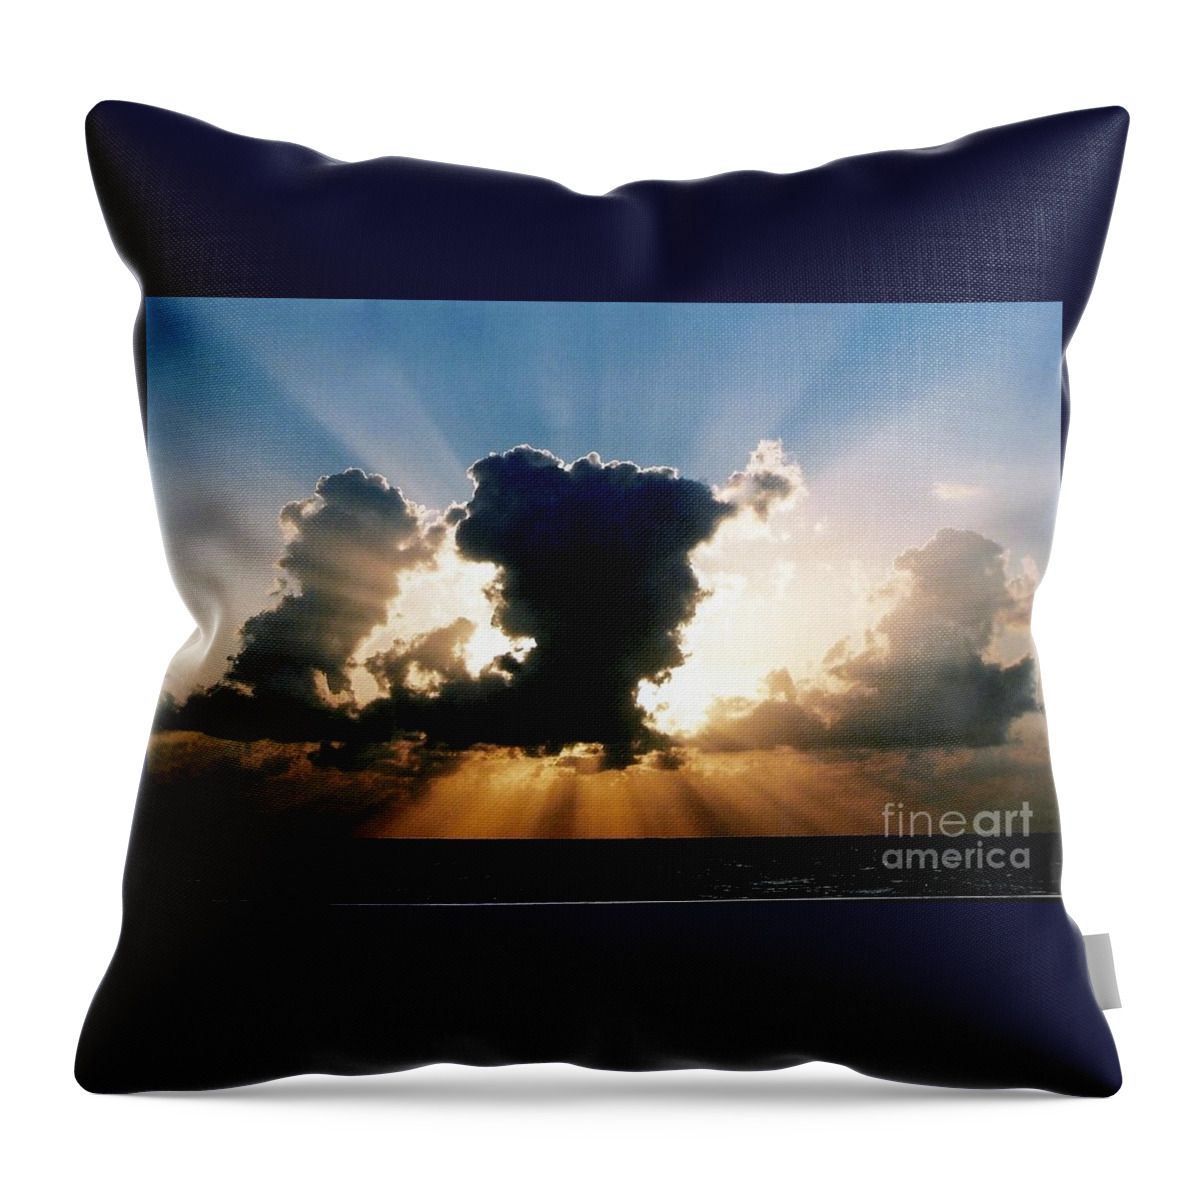 New Orleans Photography Throw Pillow featuring the photograph Blue and Gold Rays Sunset In The Gulf of Mexico Off The Coast Of Louisiana by Michael Hoard